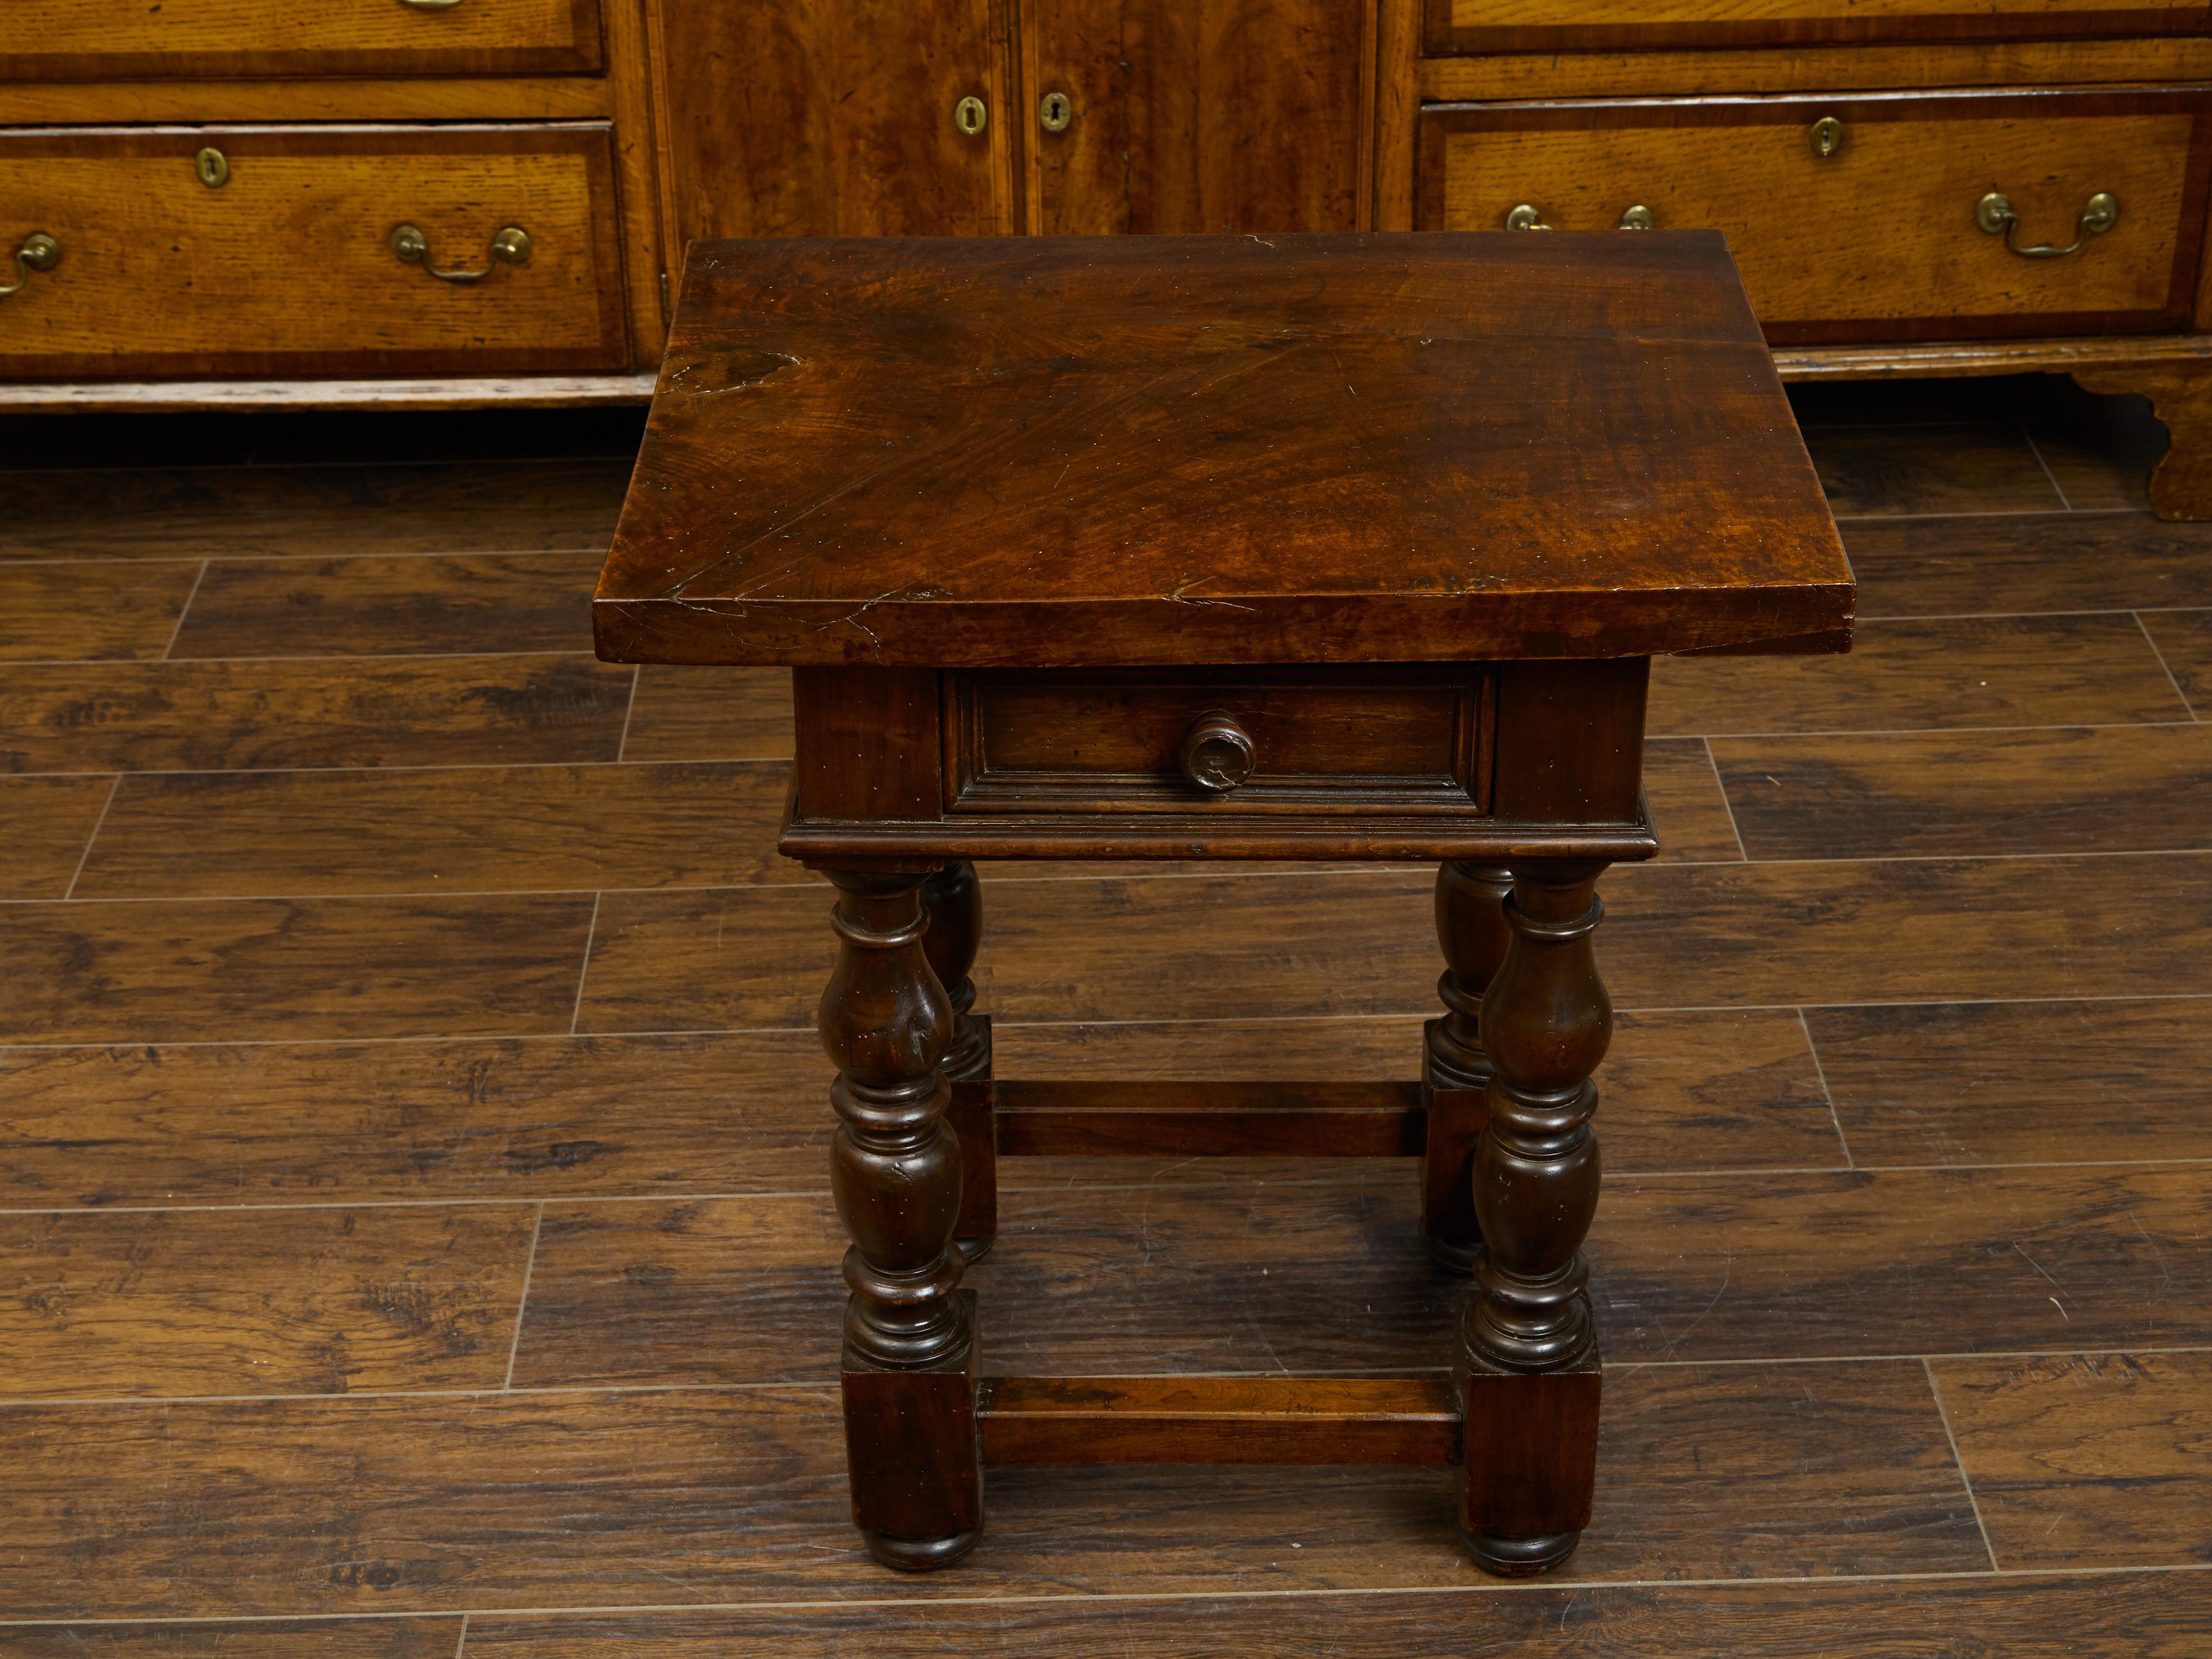 An Italian walnut side table from the early 19th century, with single drawer and turned legs. Created in Italy during the early years of the 19th century, this walnut side table features a rectangular top sitting above a single drawer fitted with a